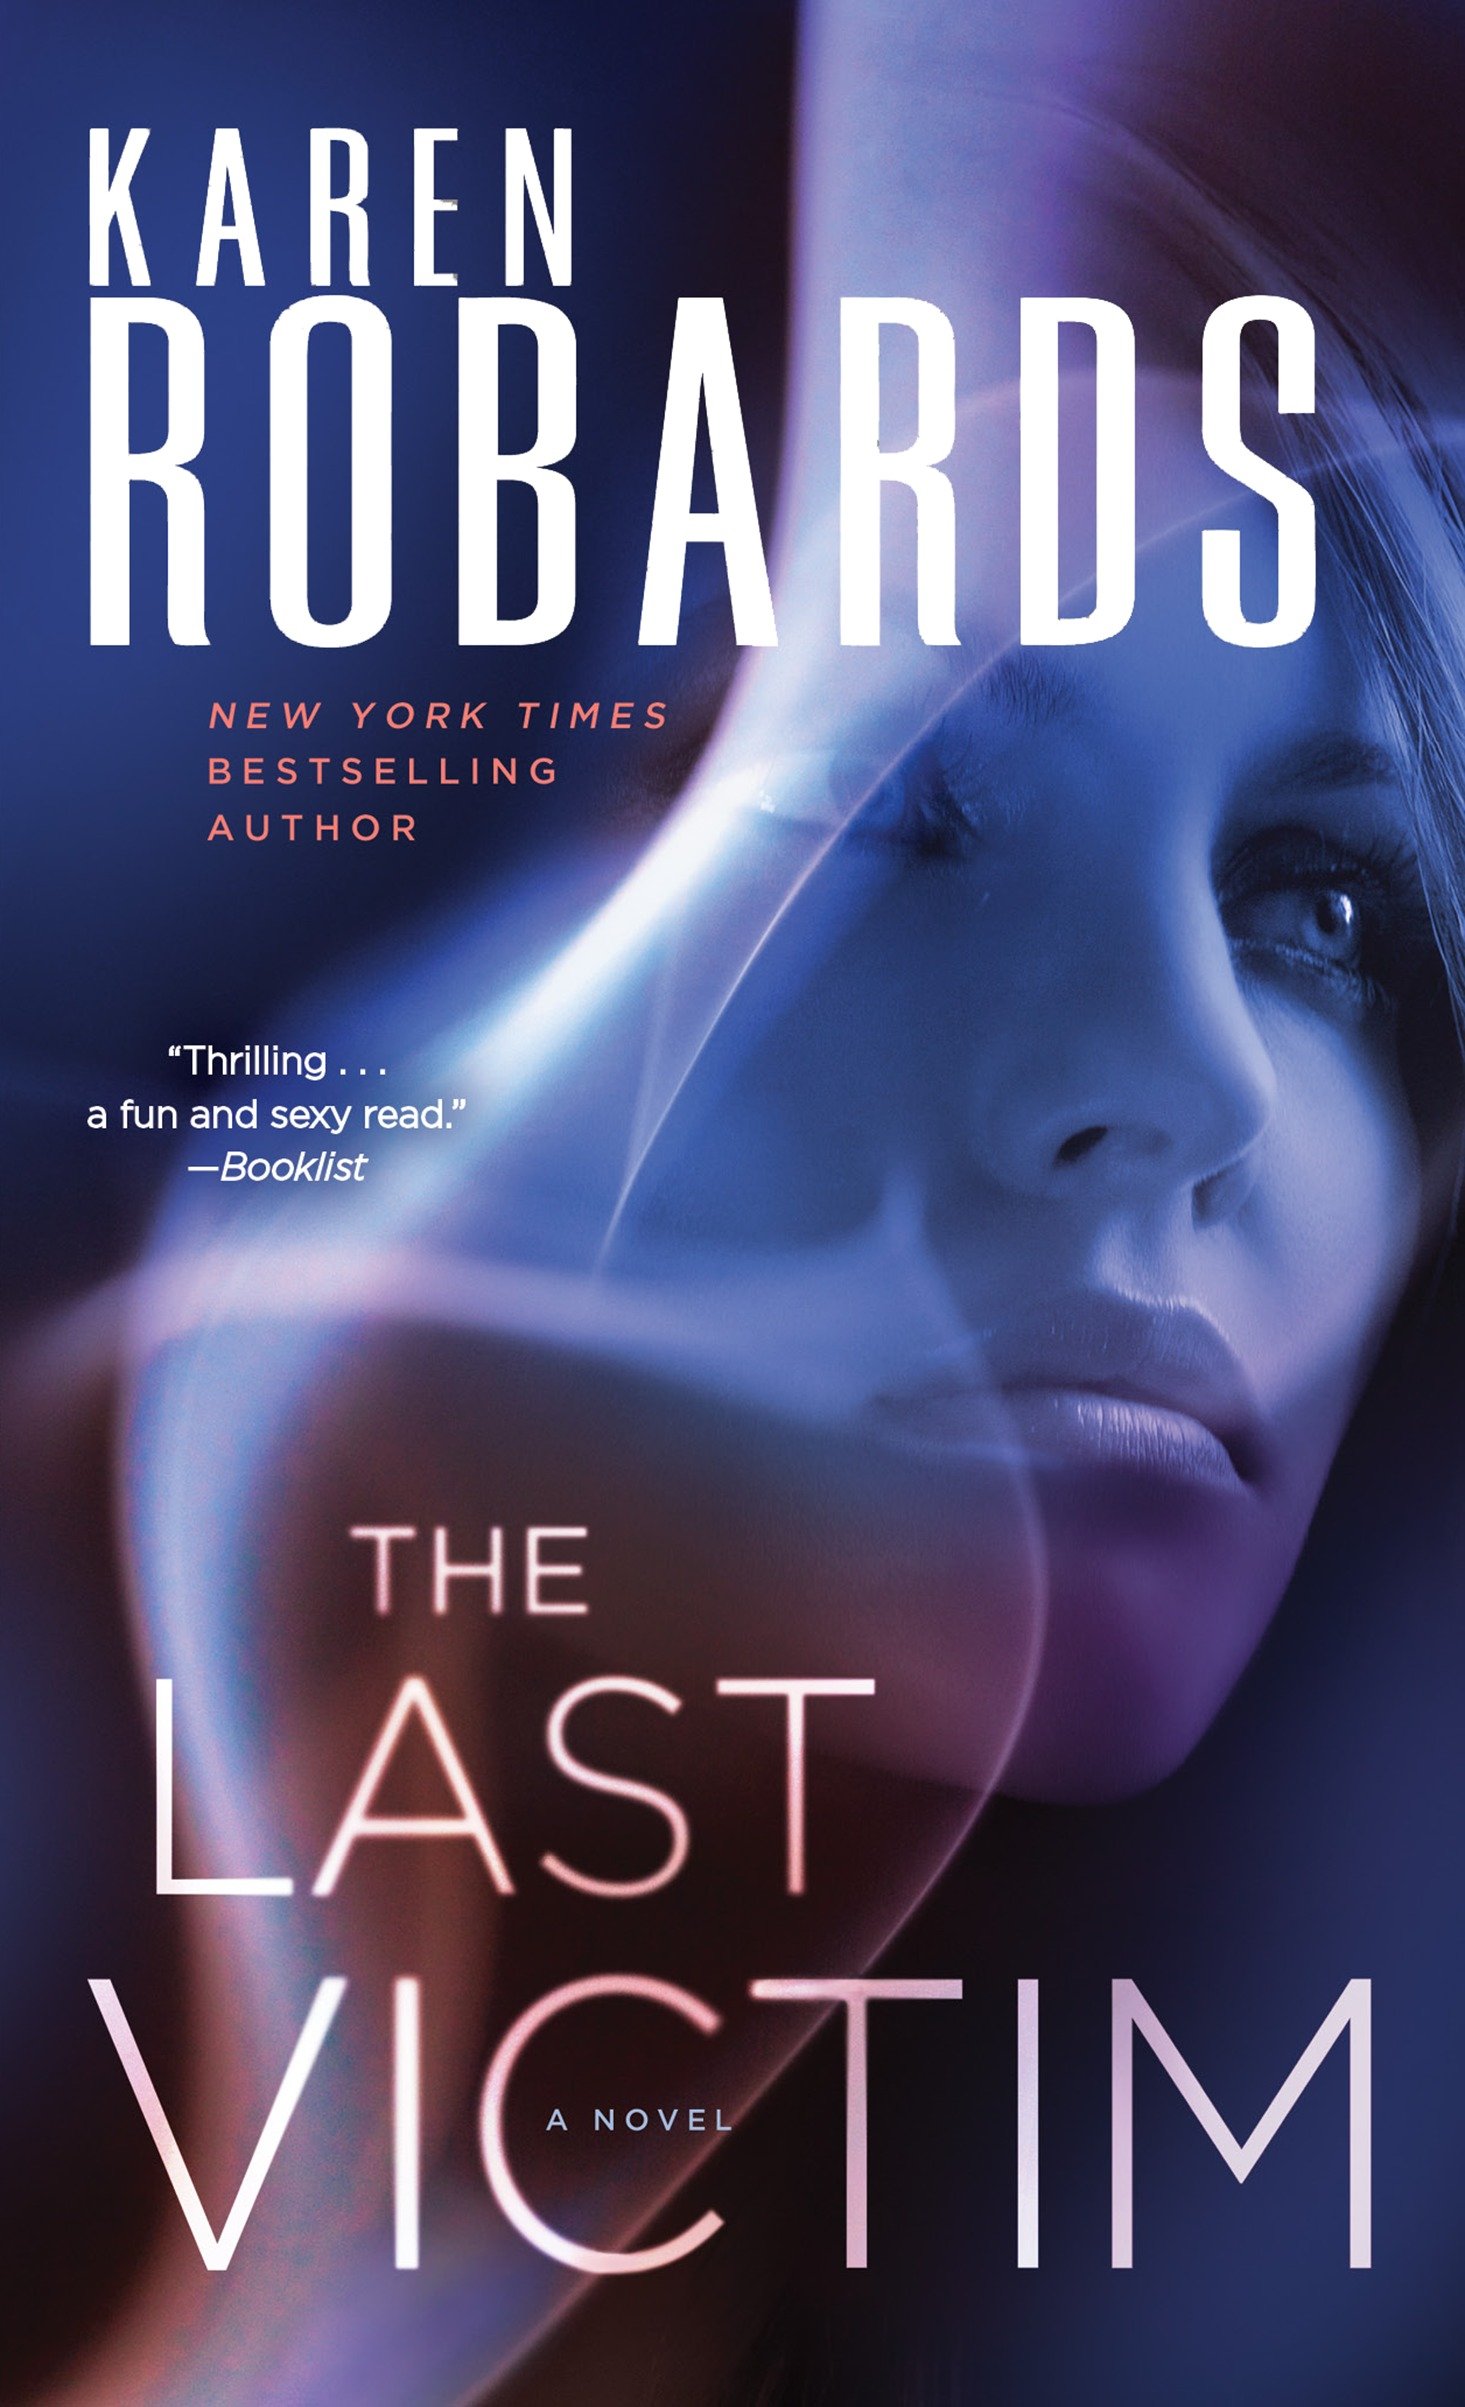 The last victim cover image